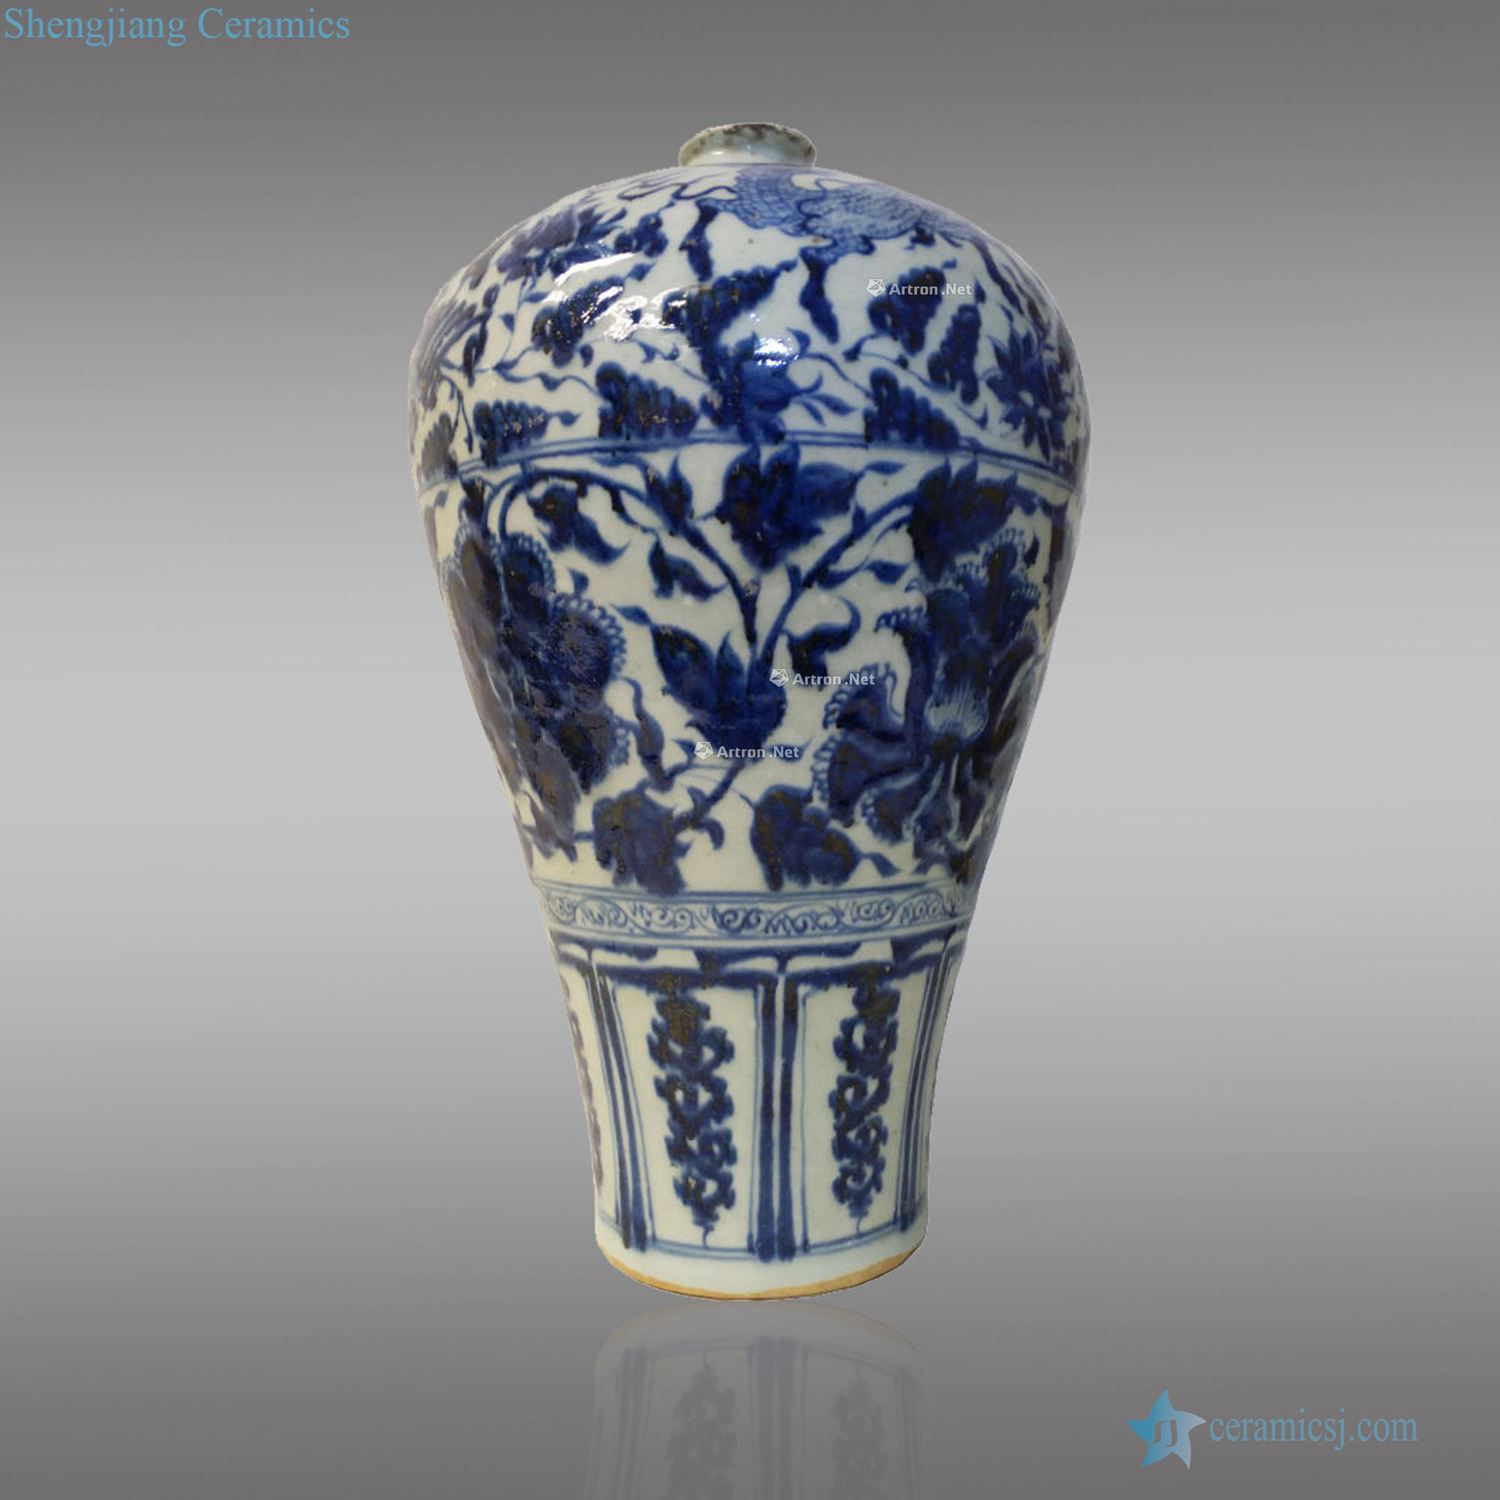 At the end of the yuan Ming Blue and white plum bottle